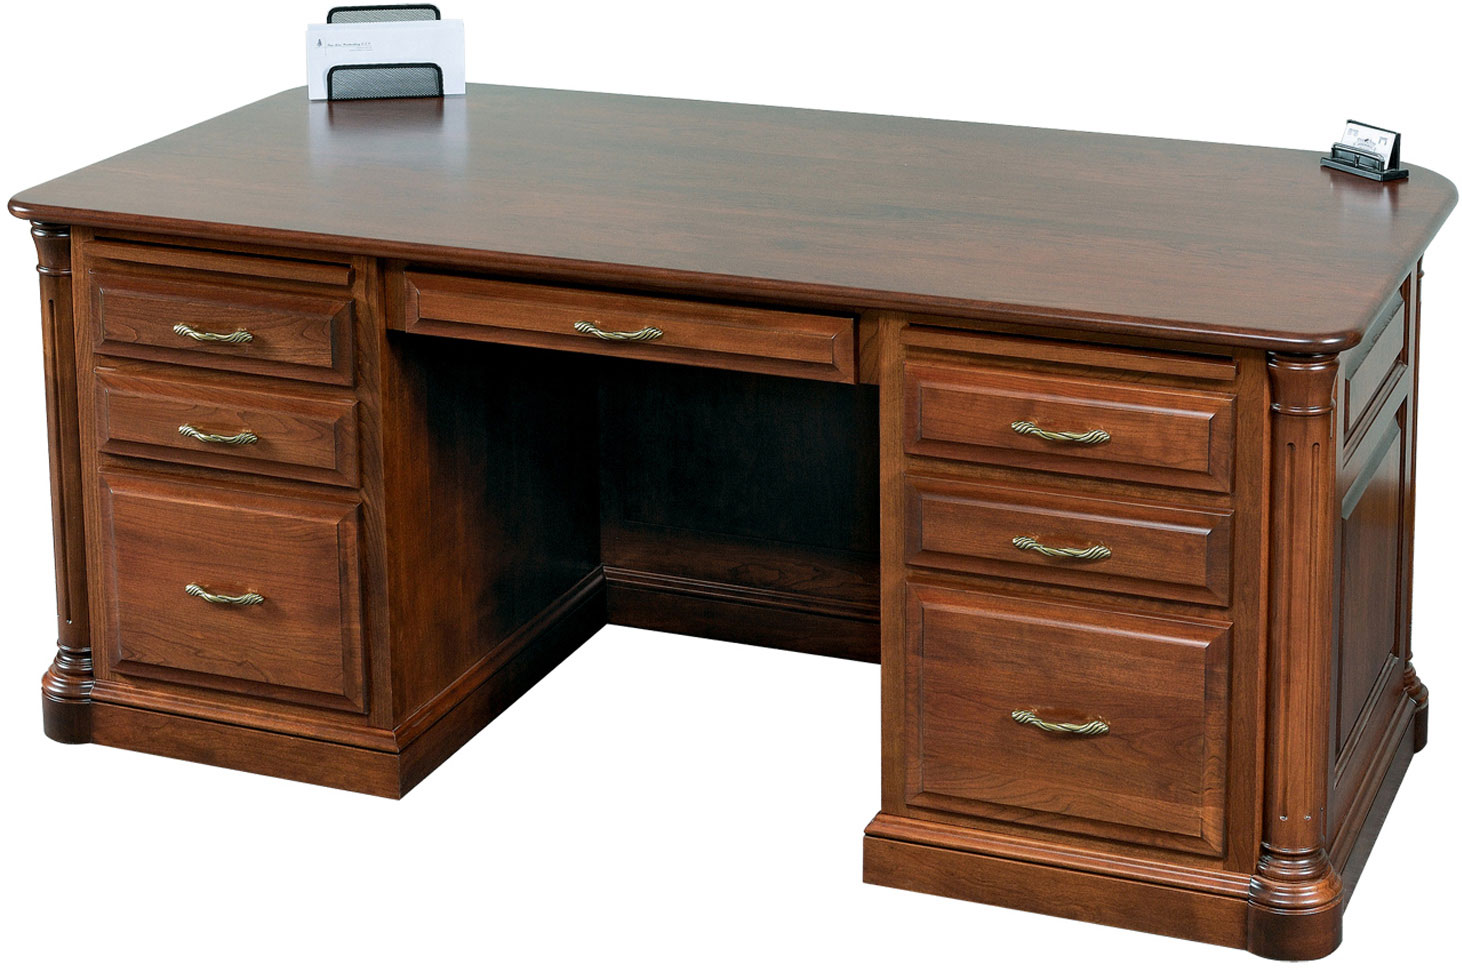 Jefferson Series Executive Desk shown in Cherry with FC 9090 Chocolate Spice Stain .